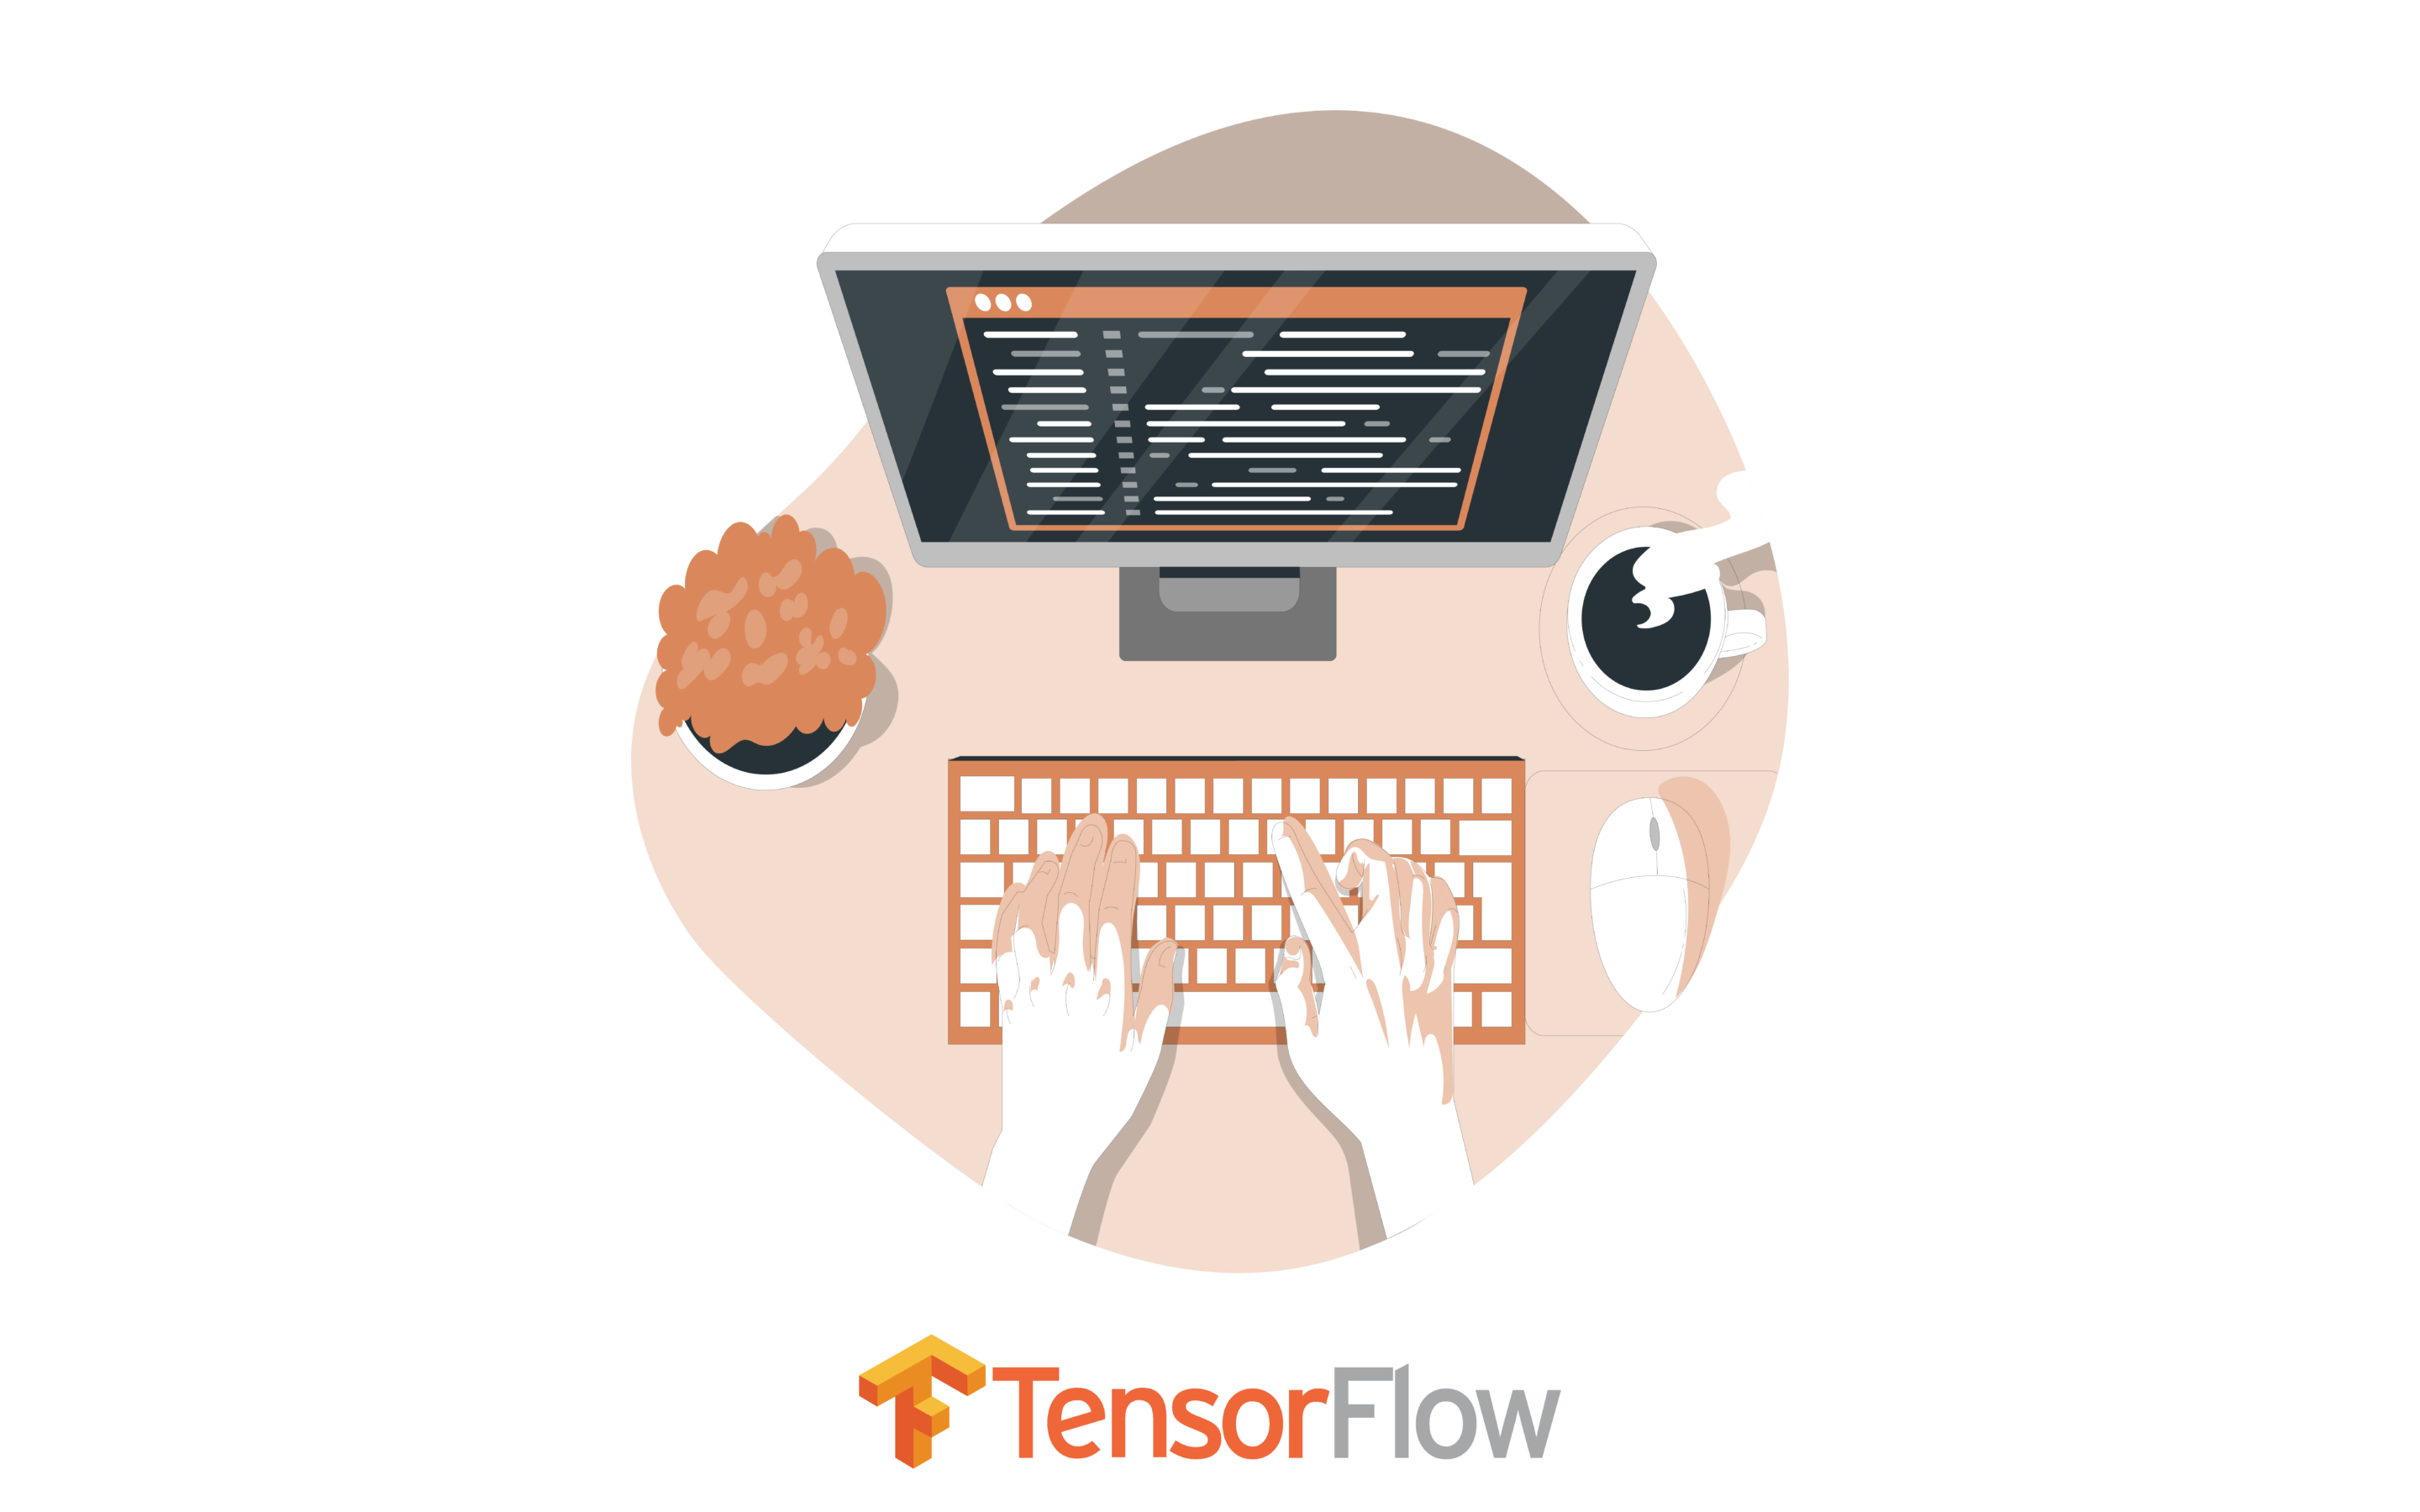 TensorFlow for Building AI Applications